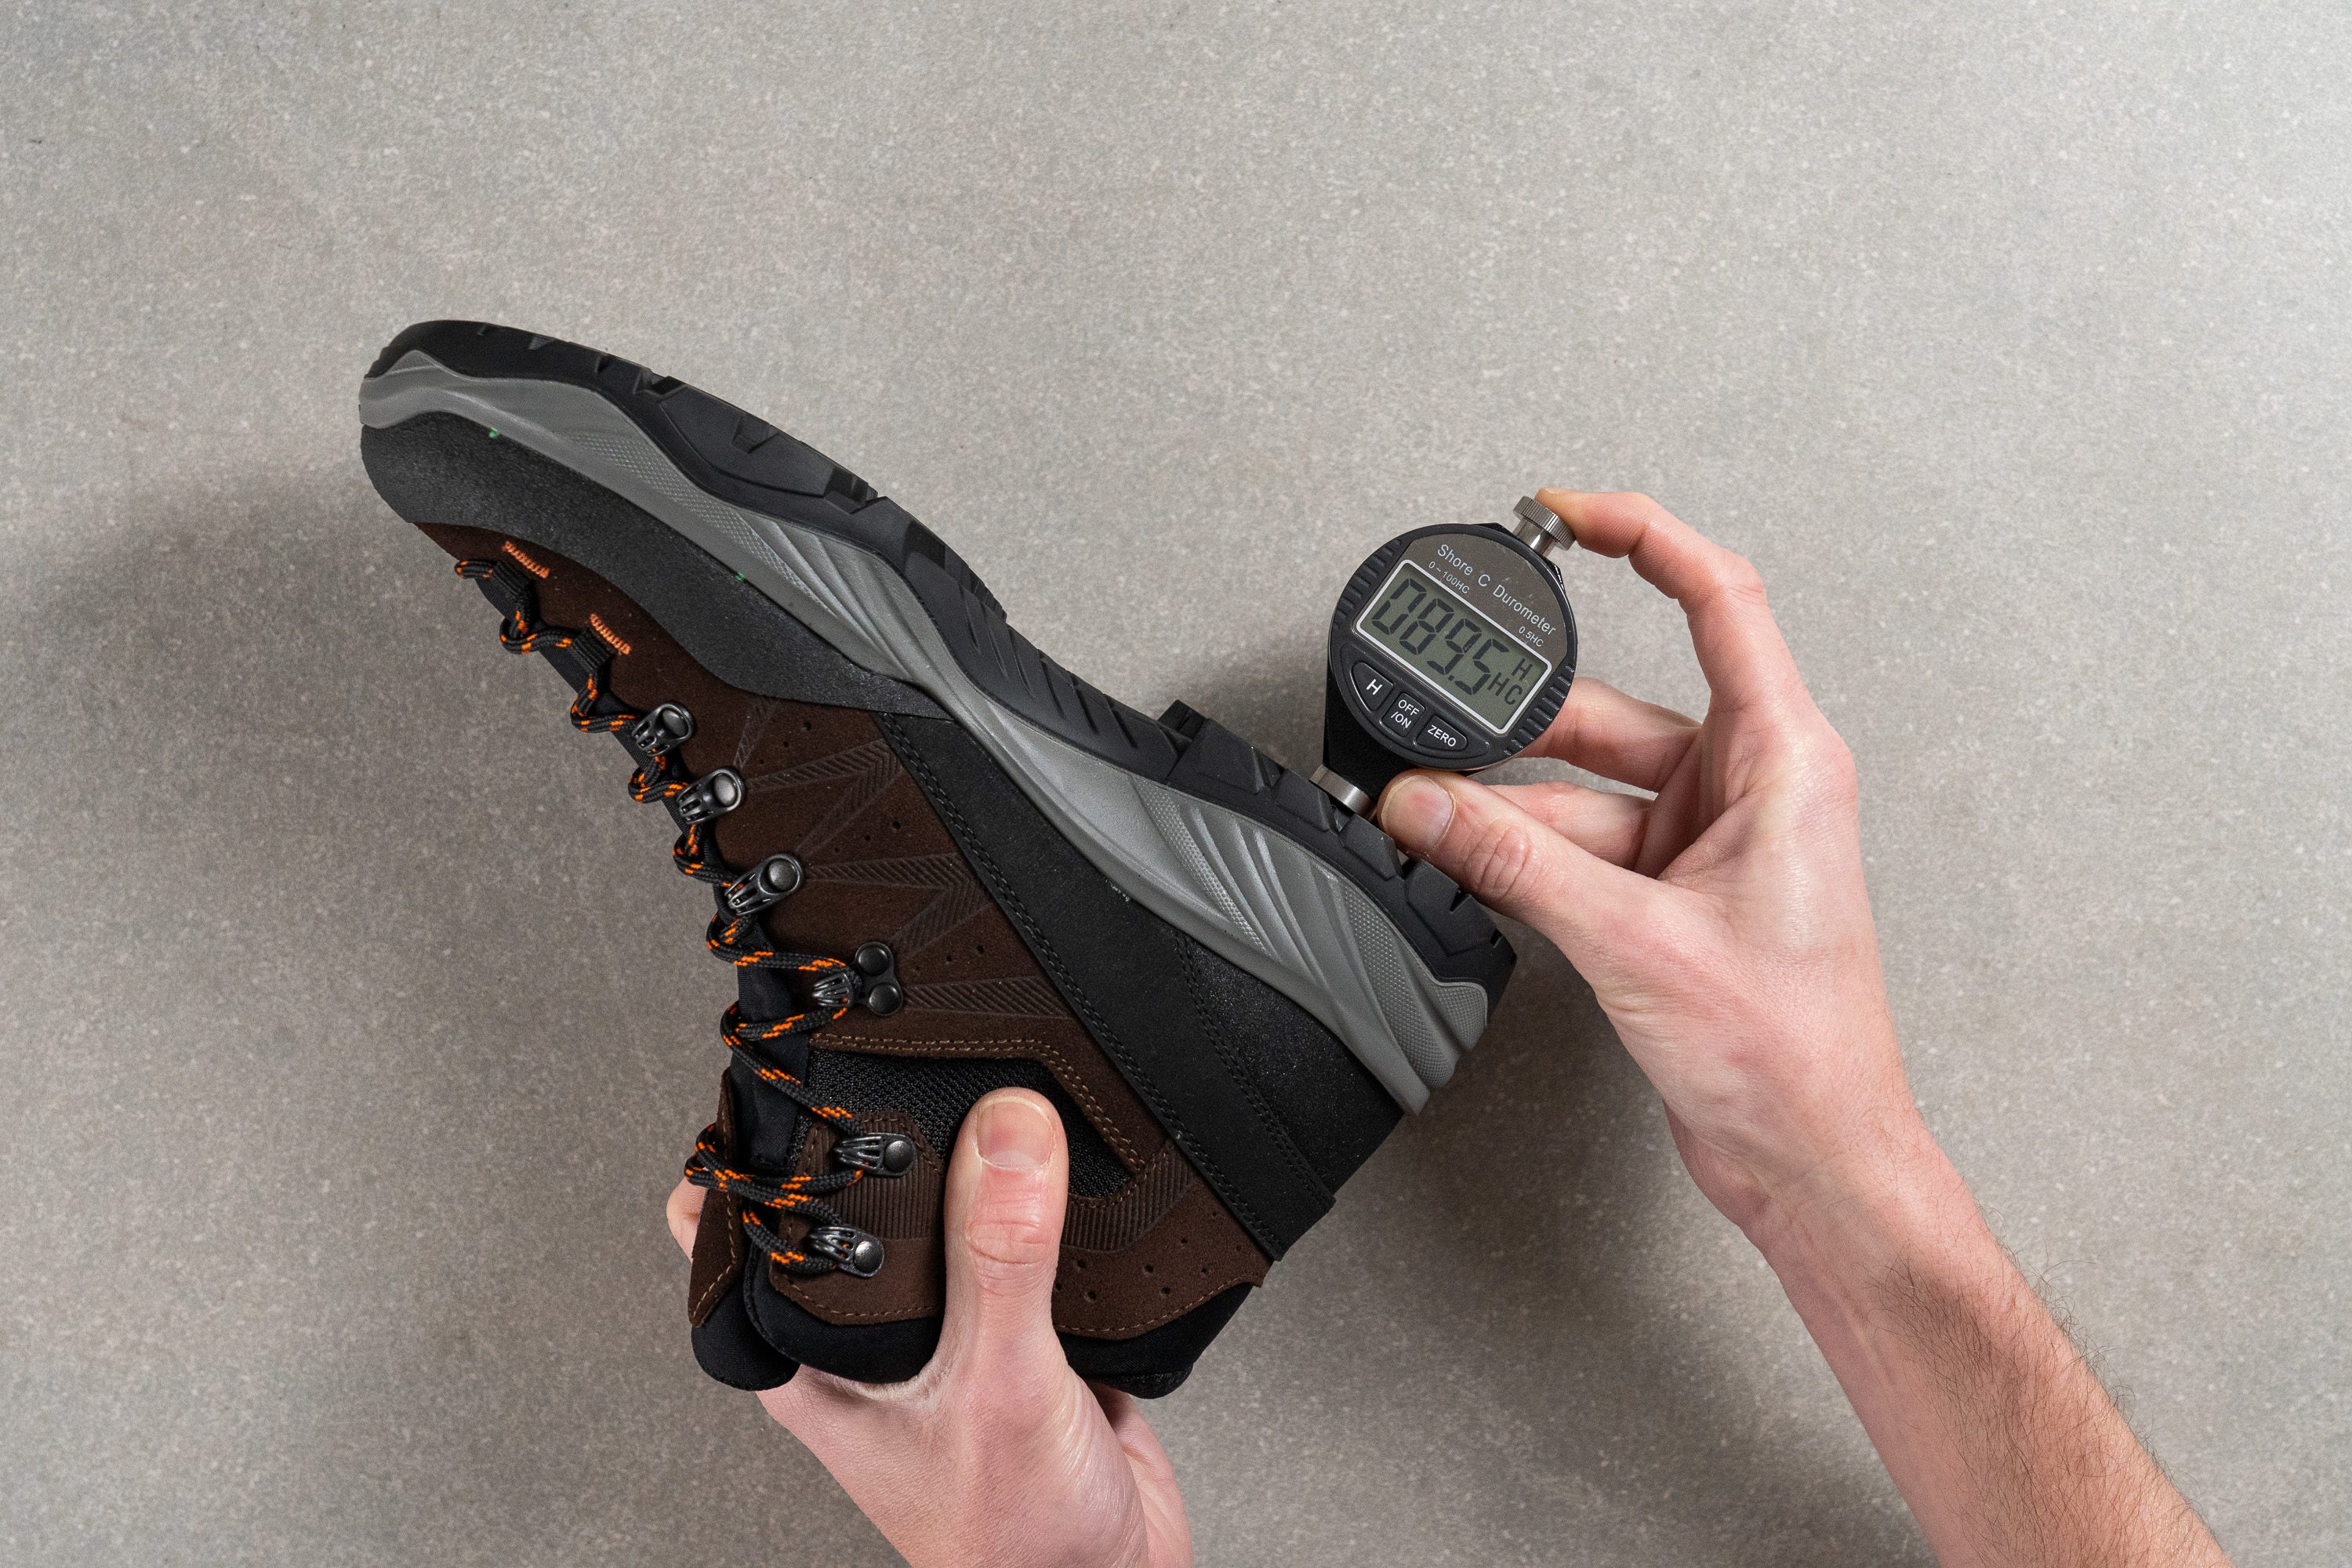 We recommend the Boreas GTX as an excellent choice for Outsole hardness